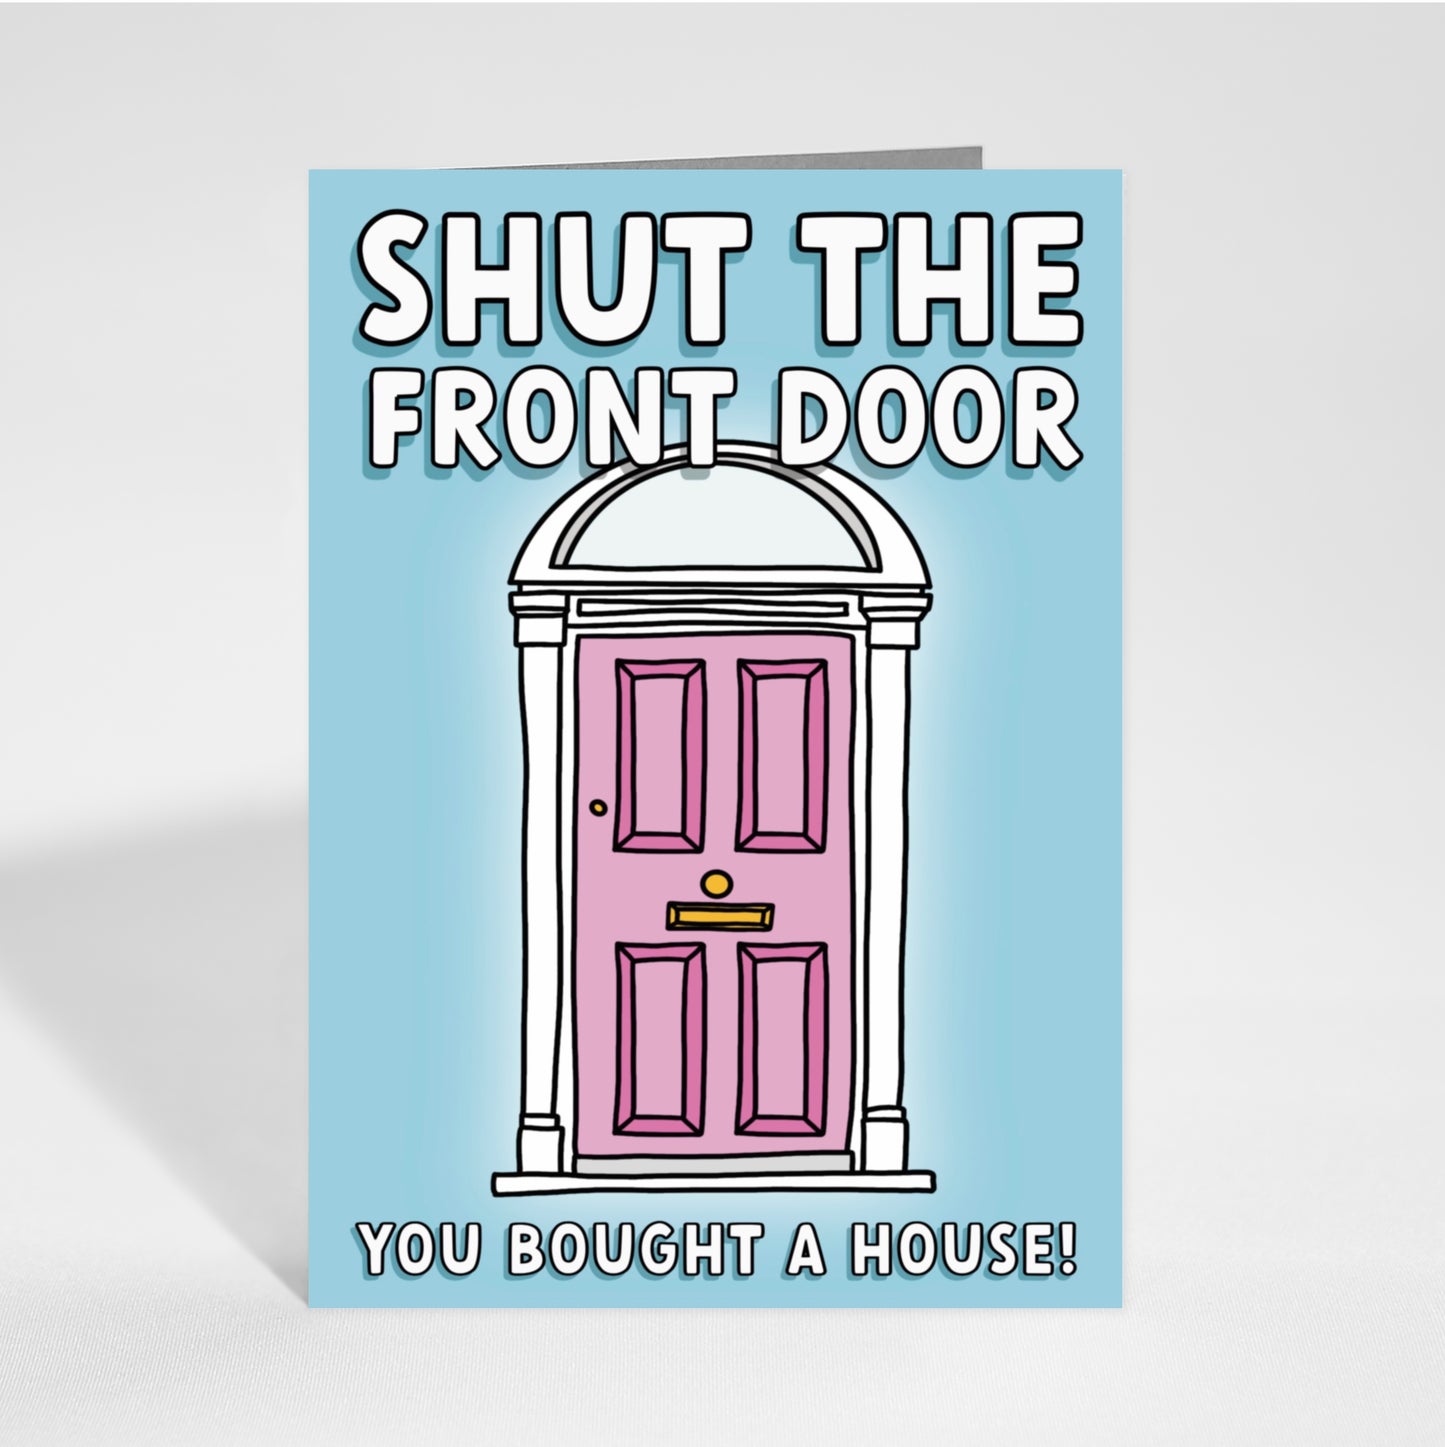 Shut the Front Door - New House Greetings Card